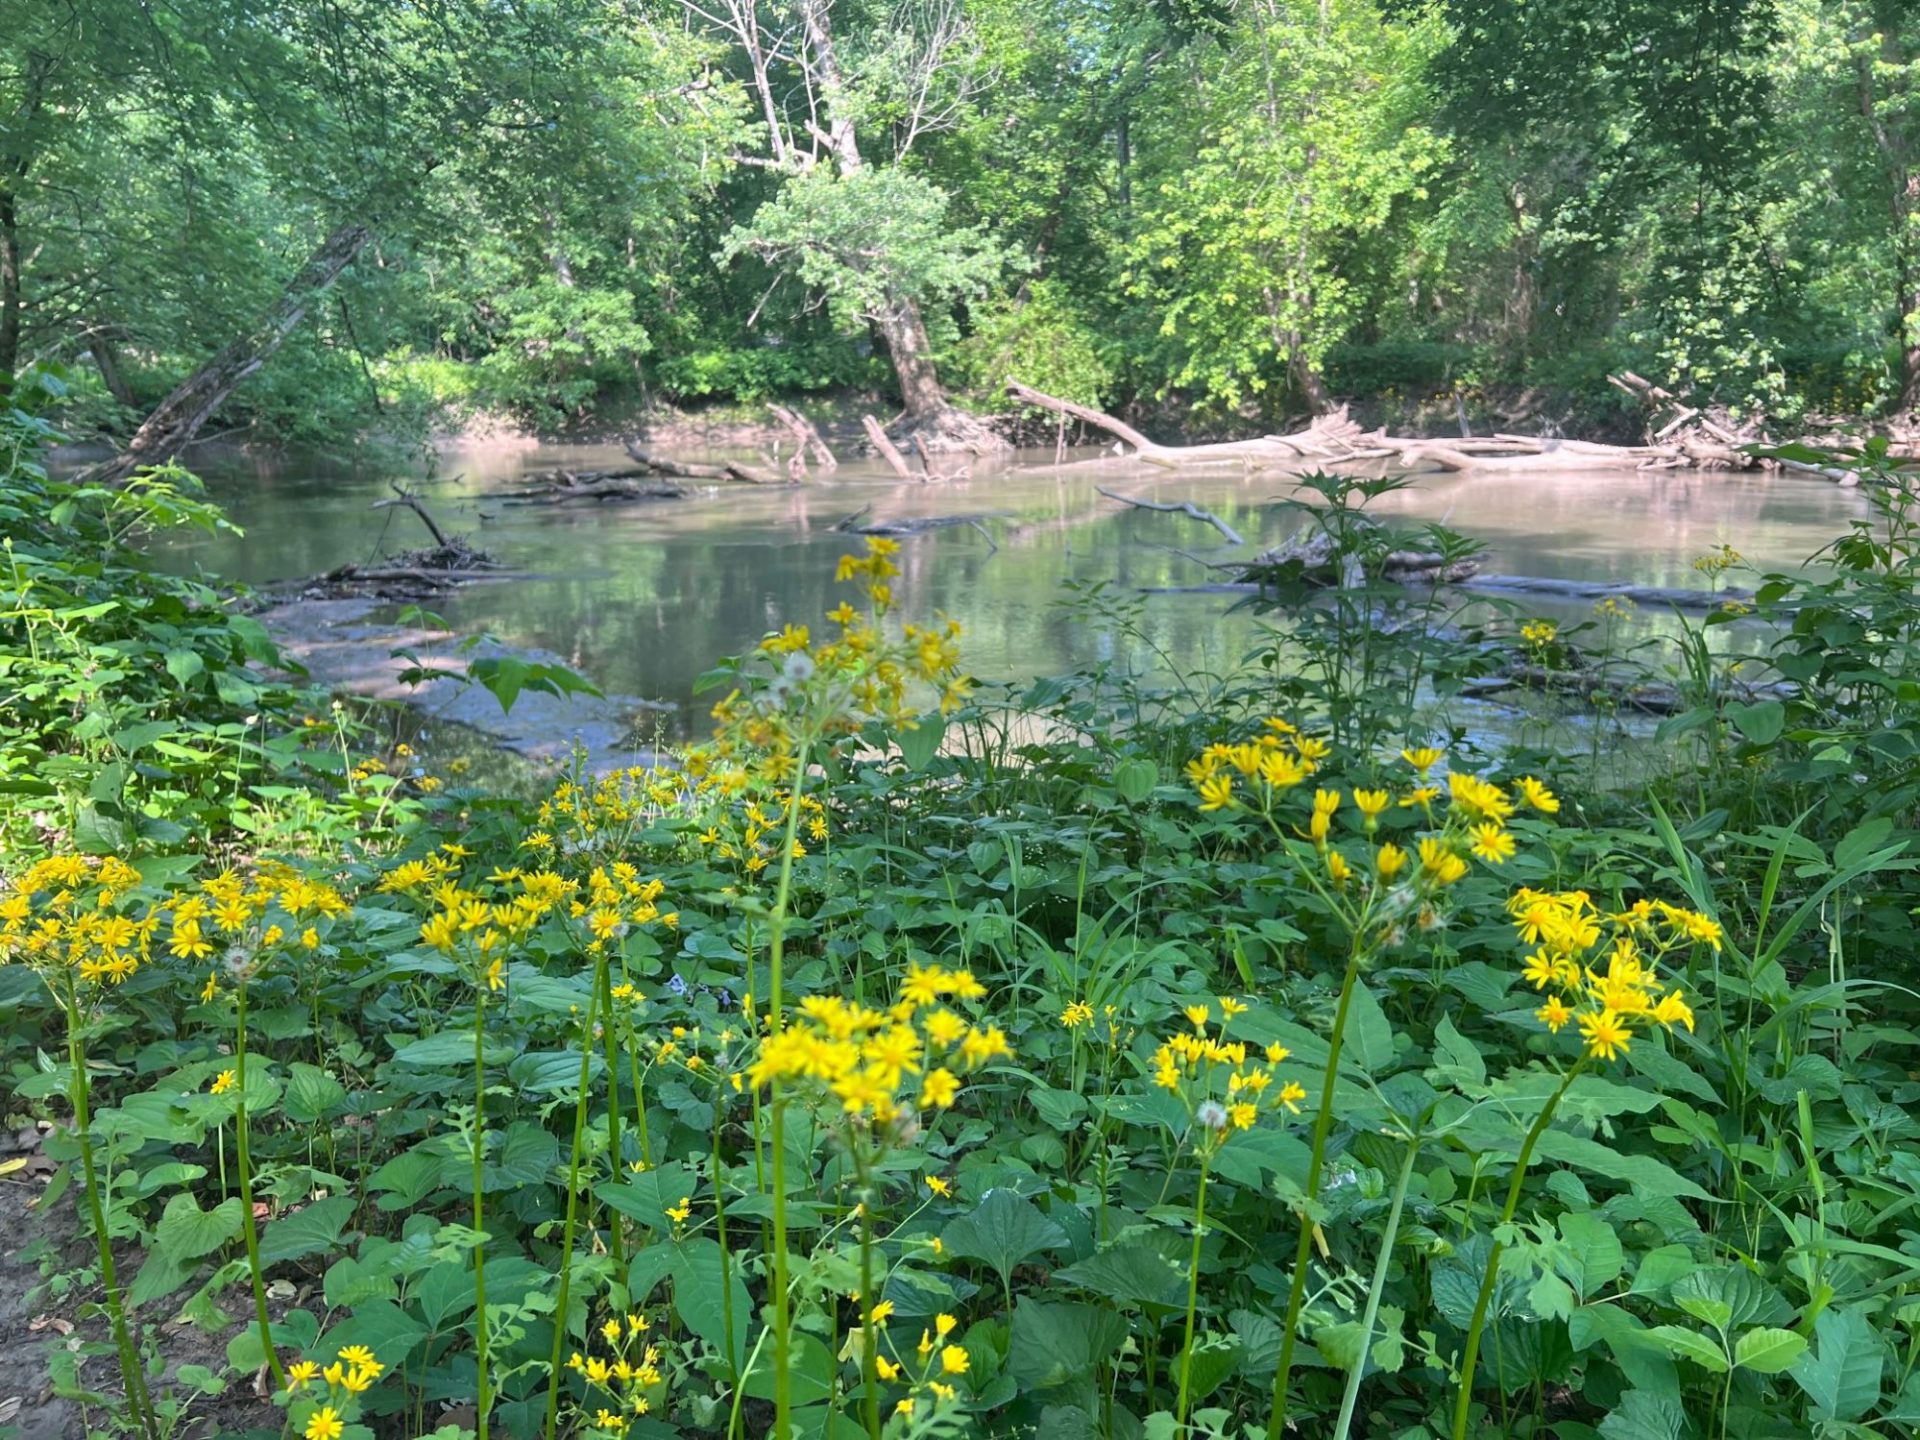 A bunch of yellow wildflowers are the the foreground, and a river with several logs in it is behind. The other bank is lined with green leafy trees.